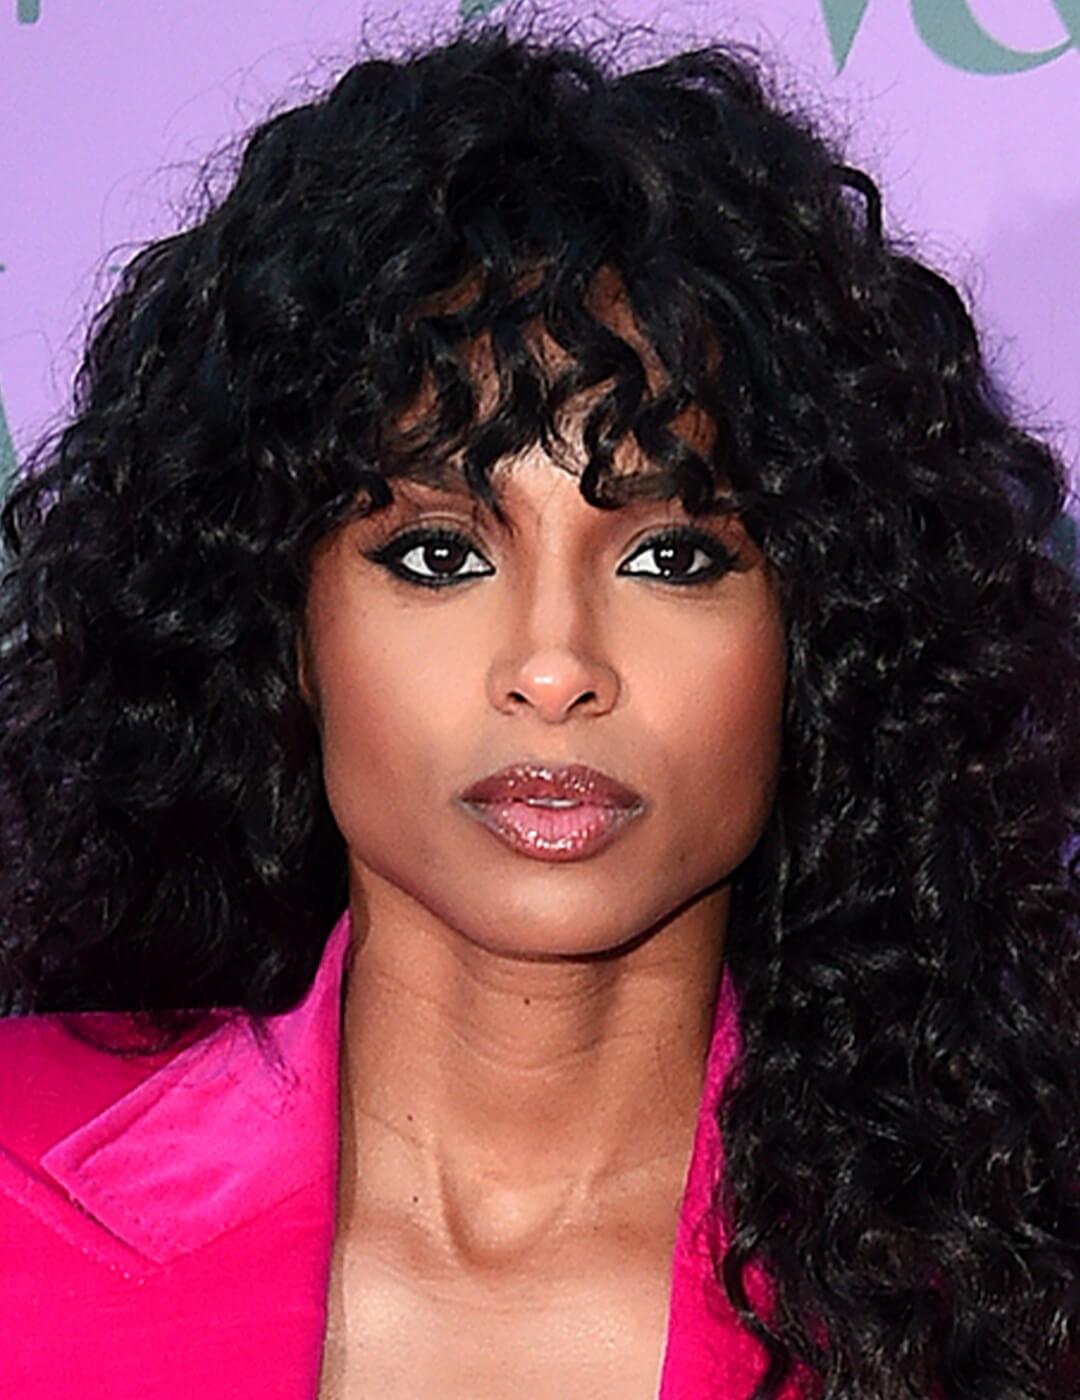 A photo of Ciara with a curly shag wearing a bright pink coat